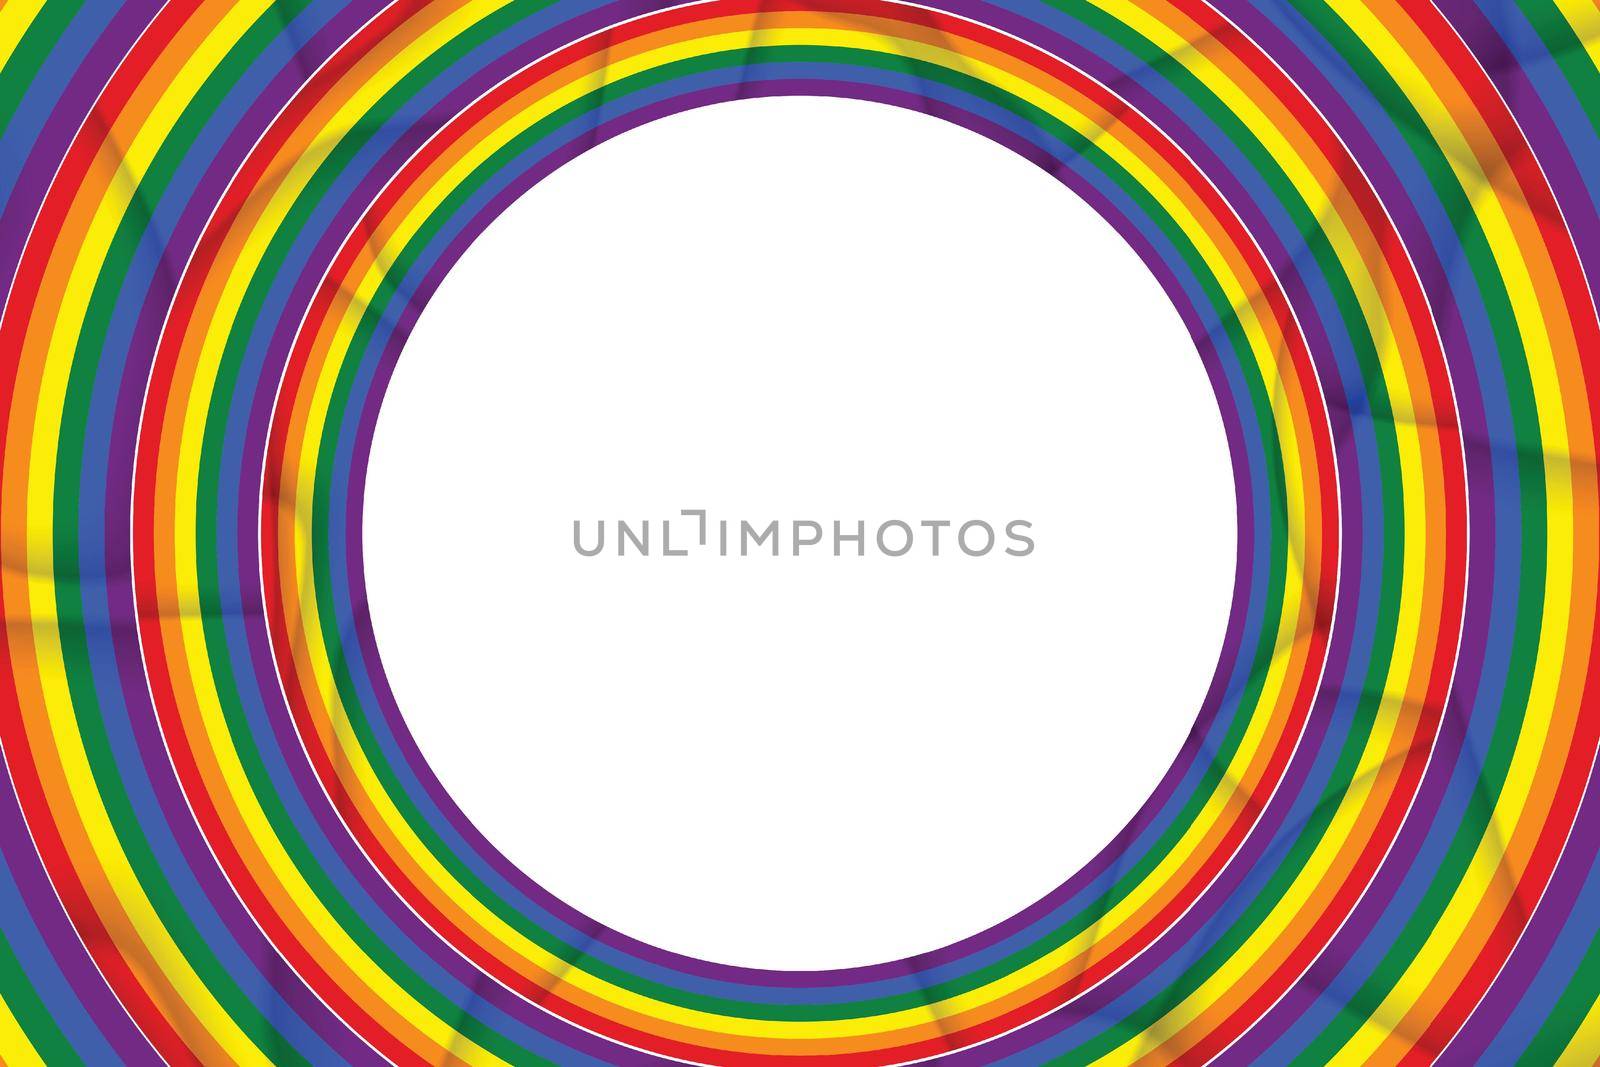 Flag LGBT icon, round frame. Template design, vector illustration. Love wins. LGBT symbol in rainbow colors. Gay pride collection.